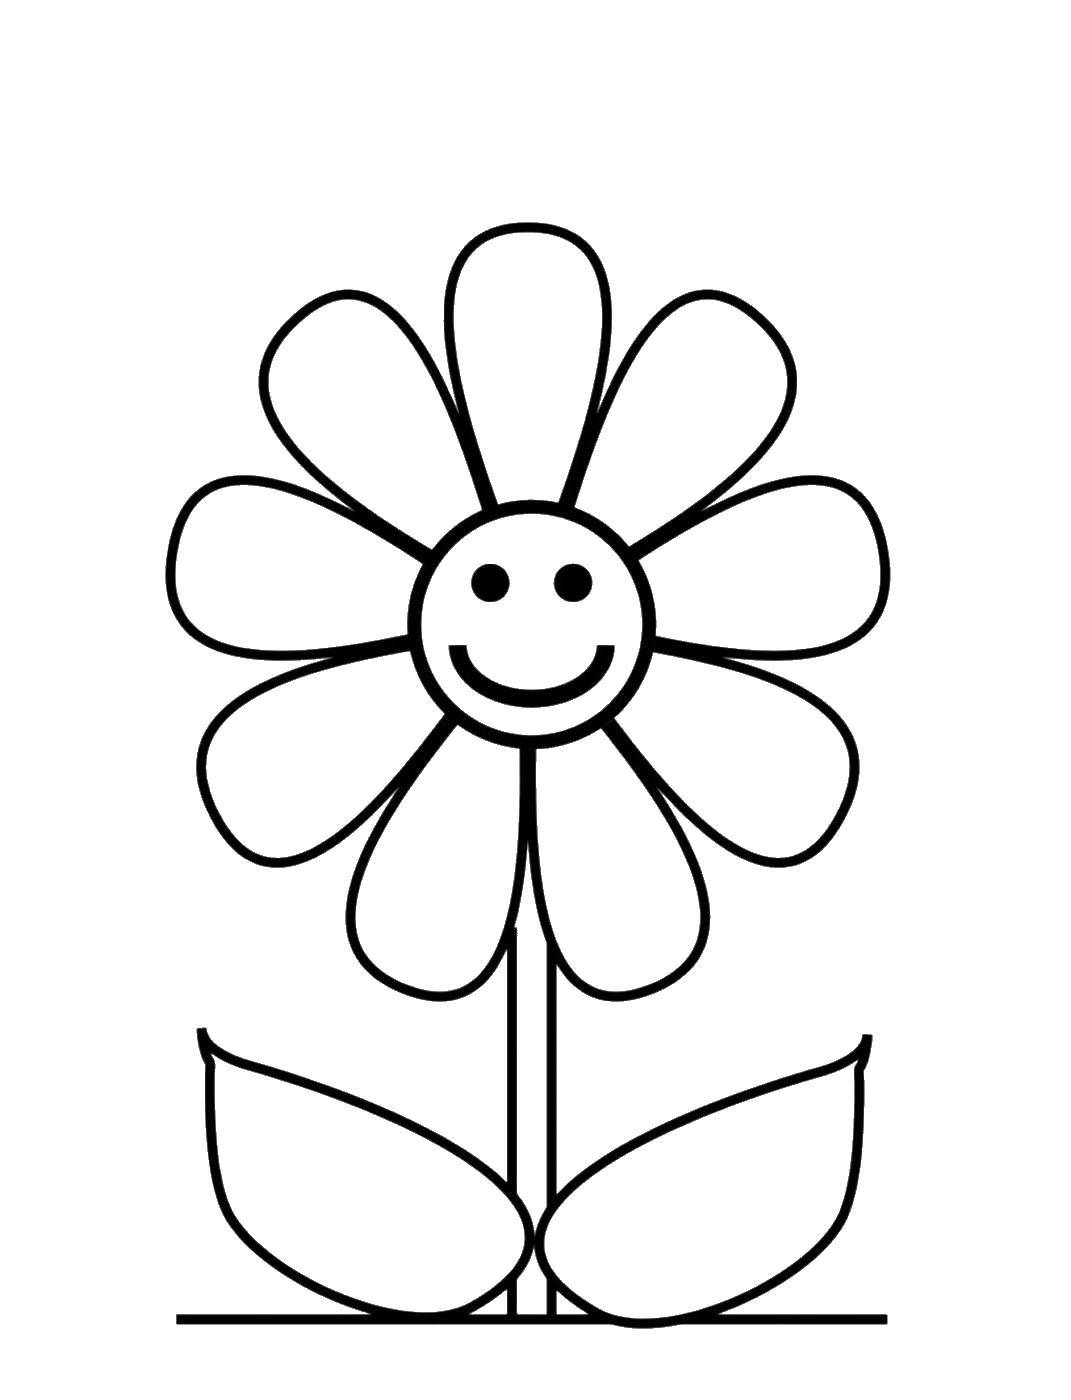 Online coloring pages Coloring page Joyful flower Coloring pages ...